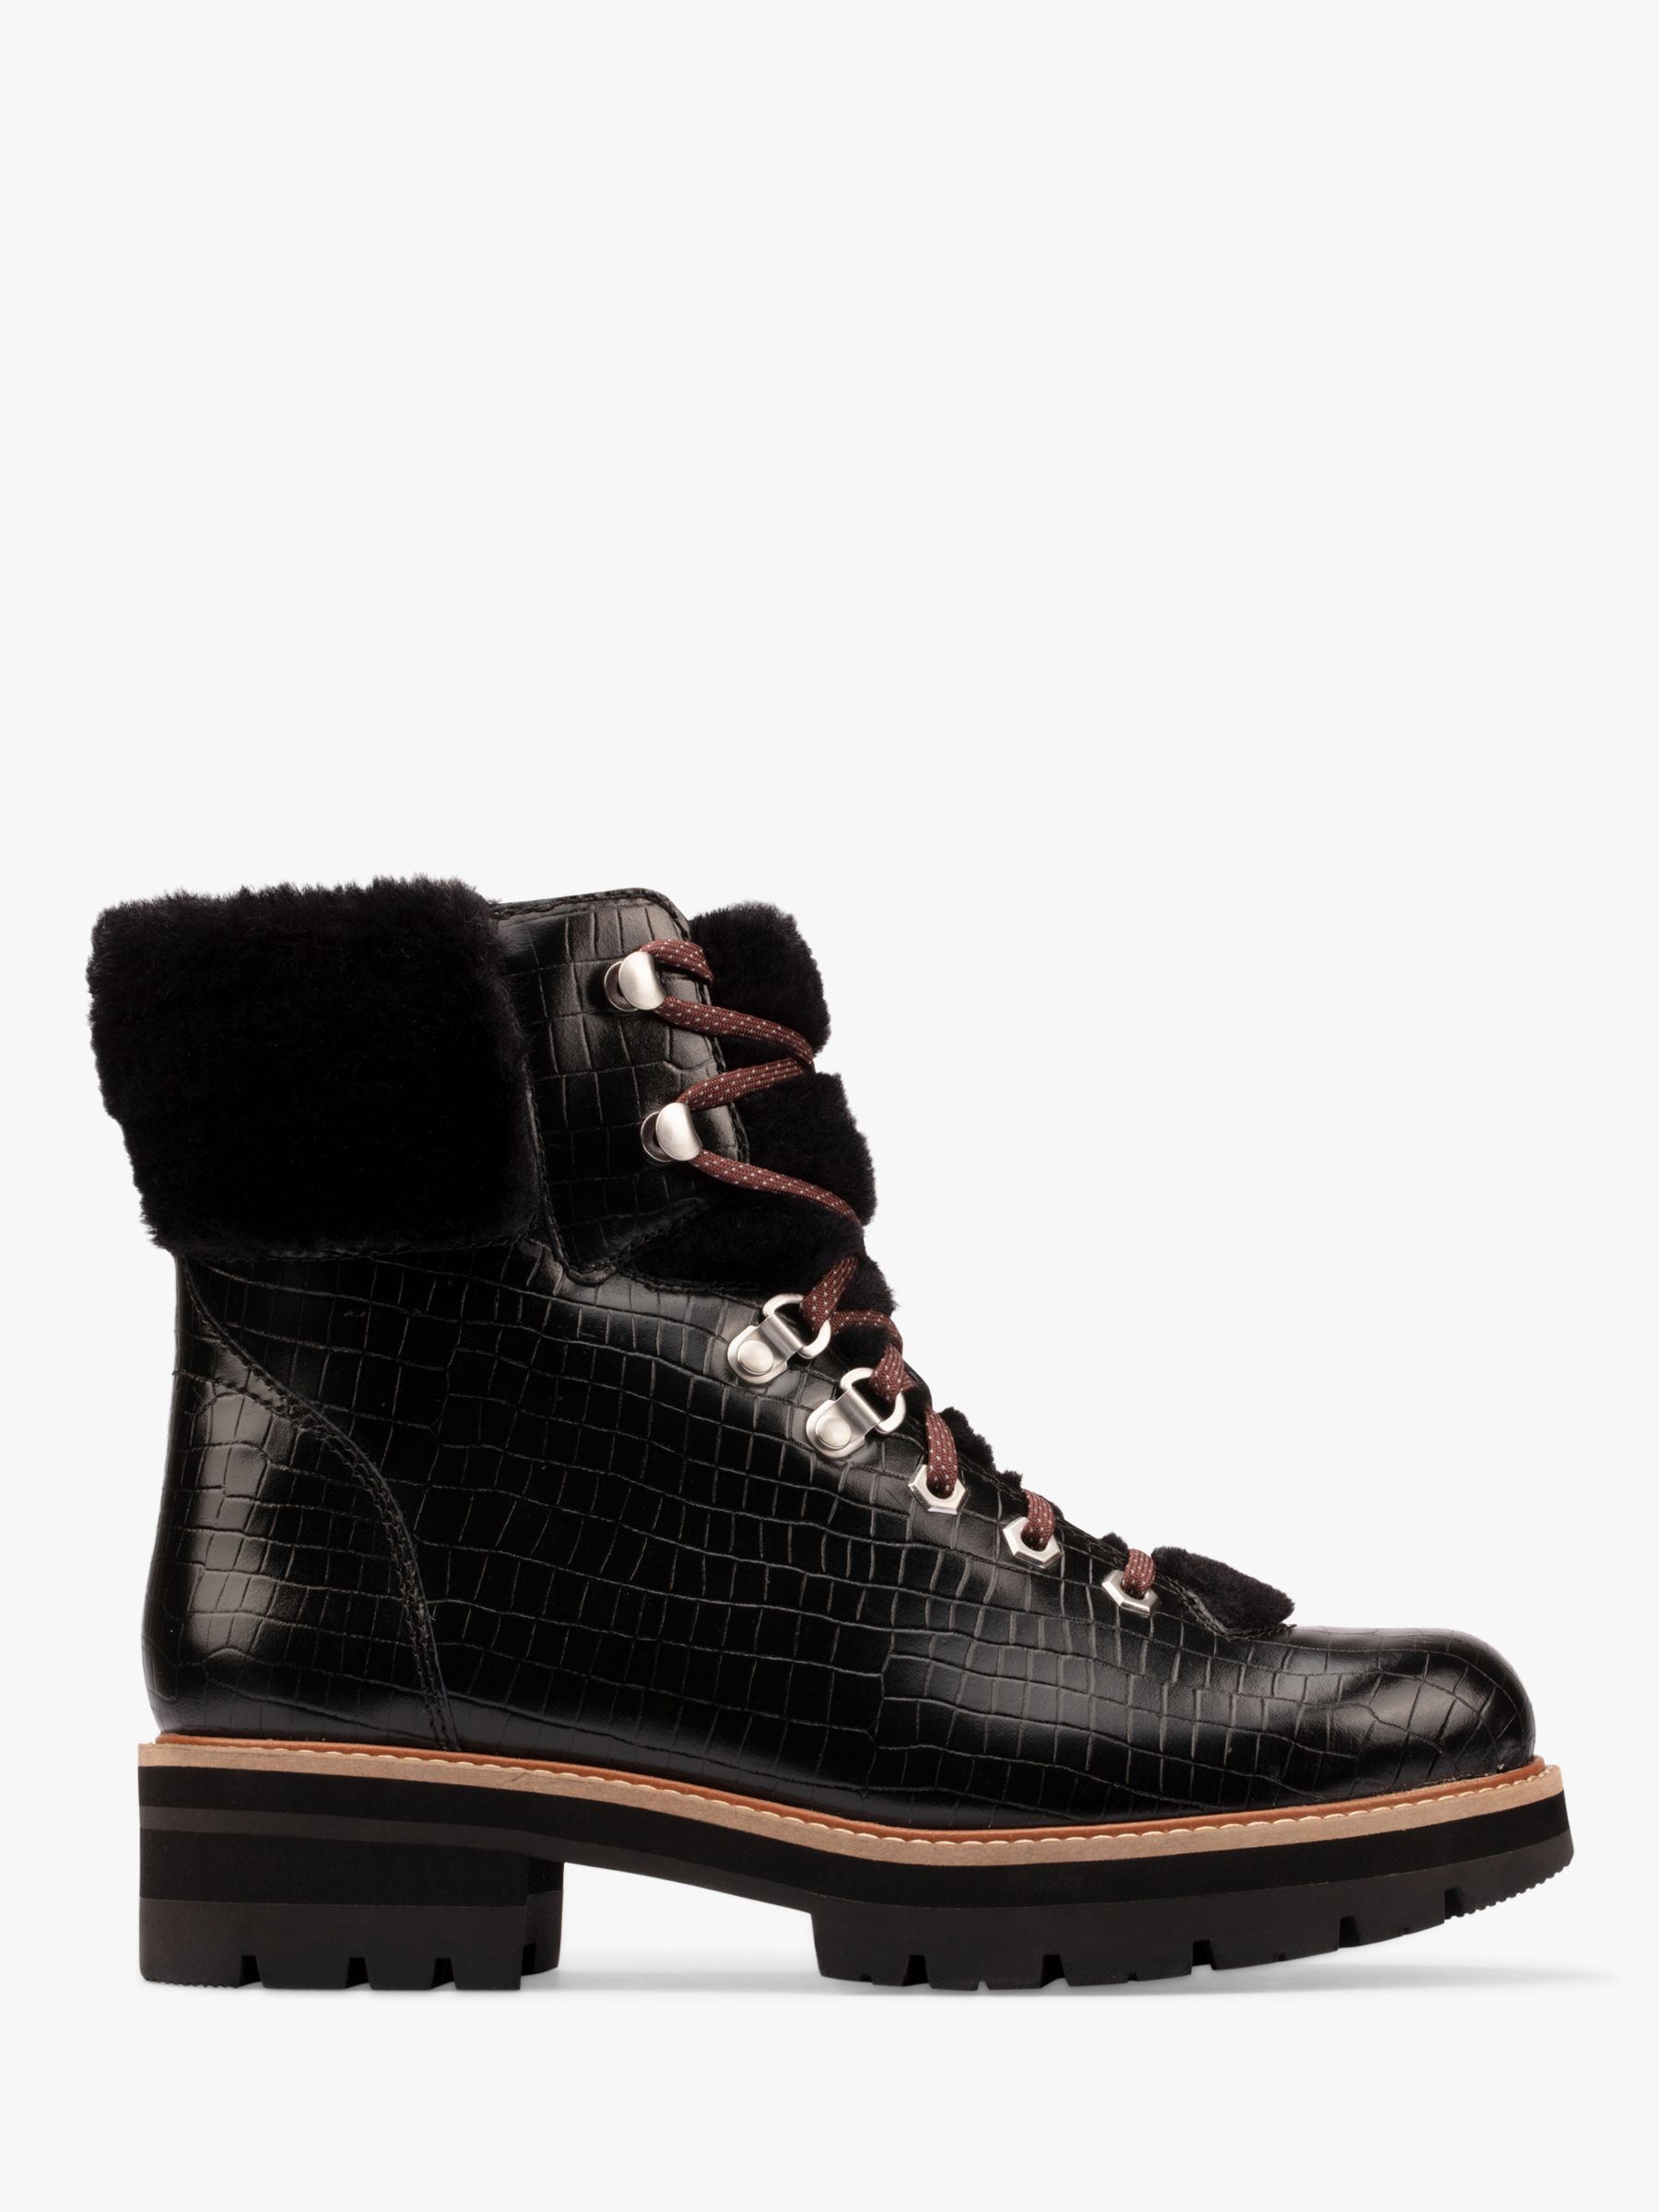 Clarks Orianna Chunky Croc Effect Leather Hiker Boots, Black